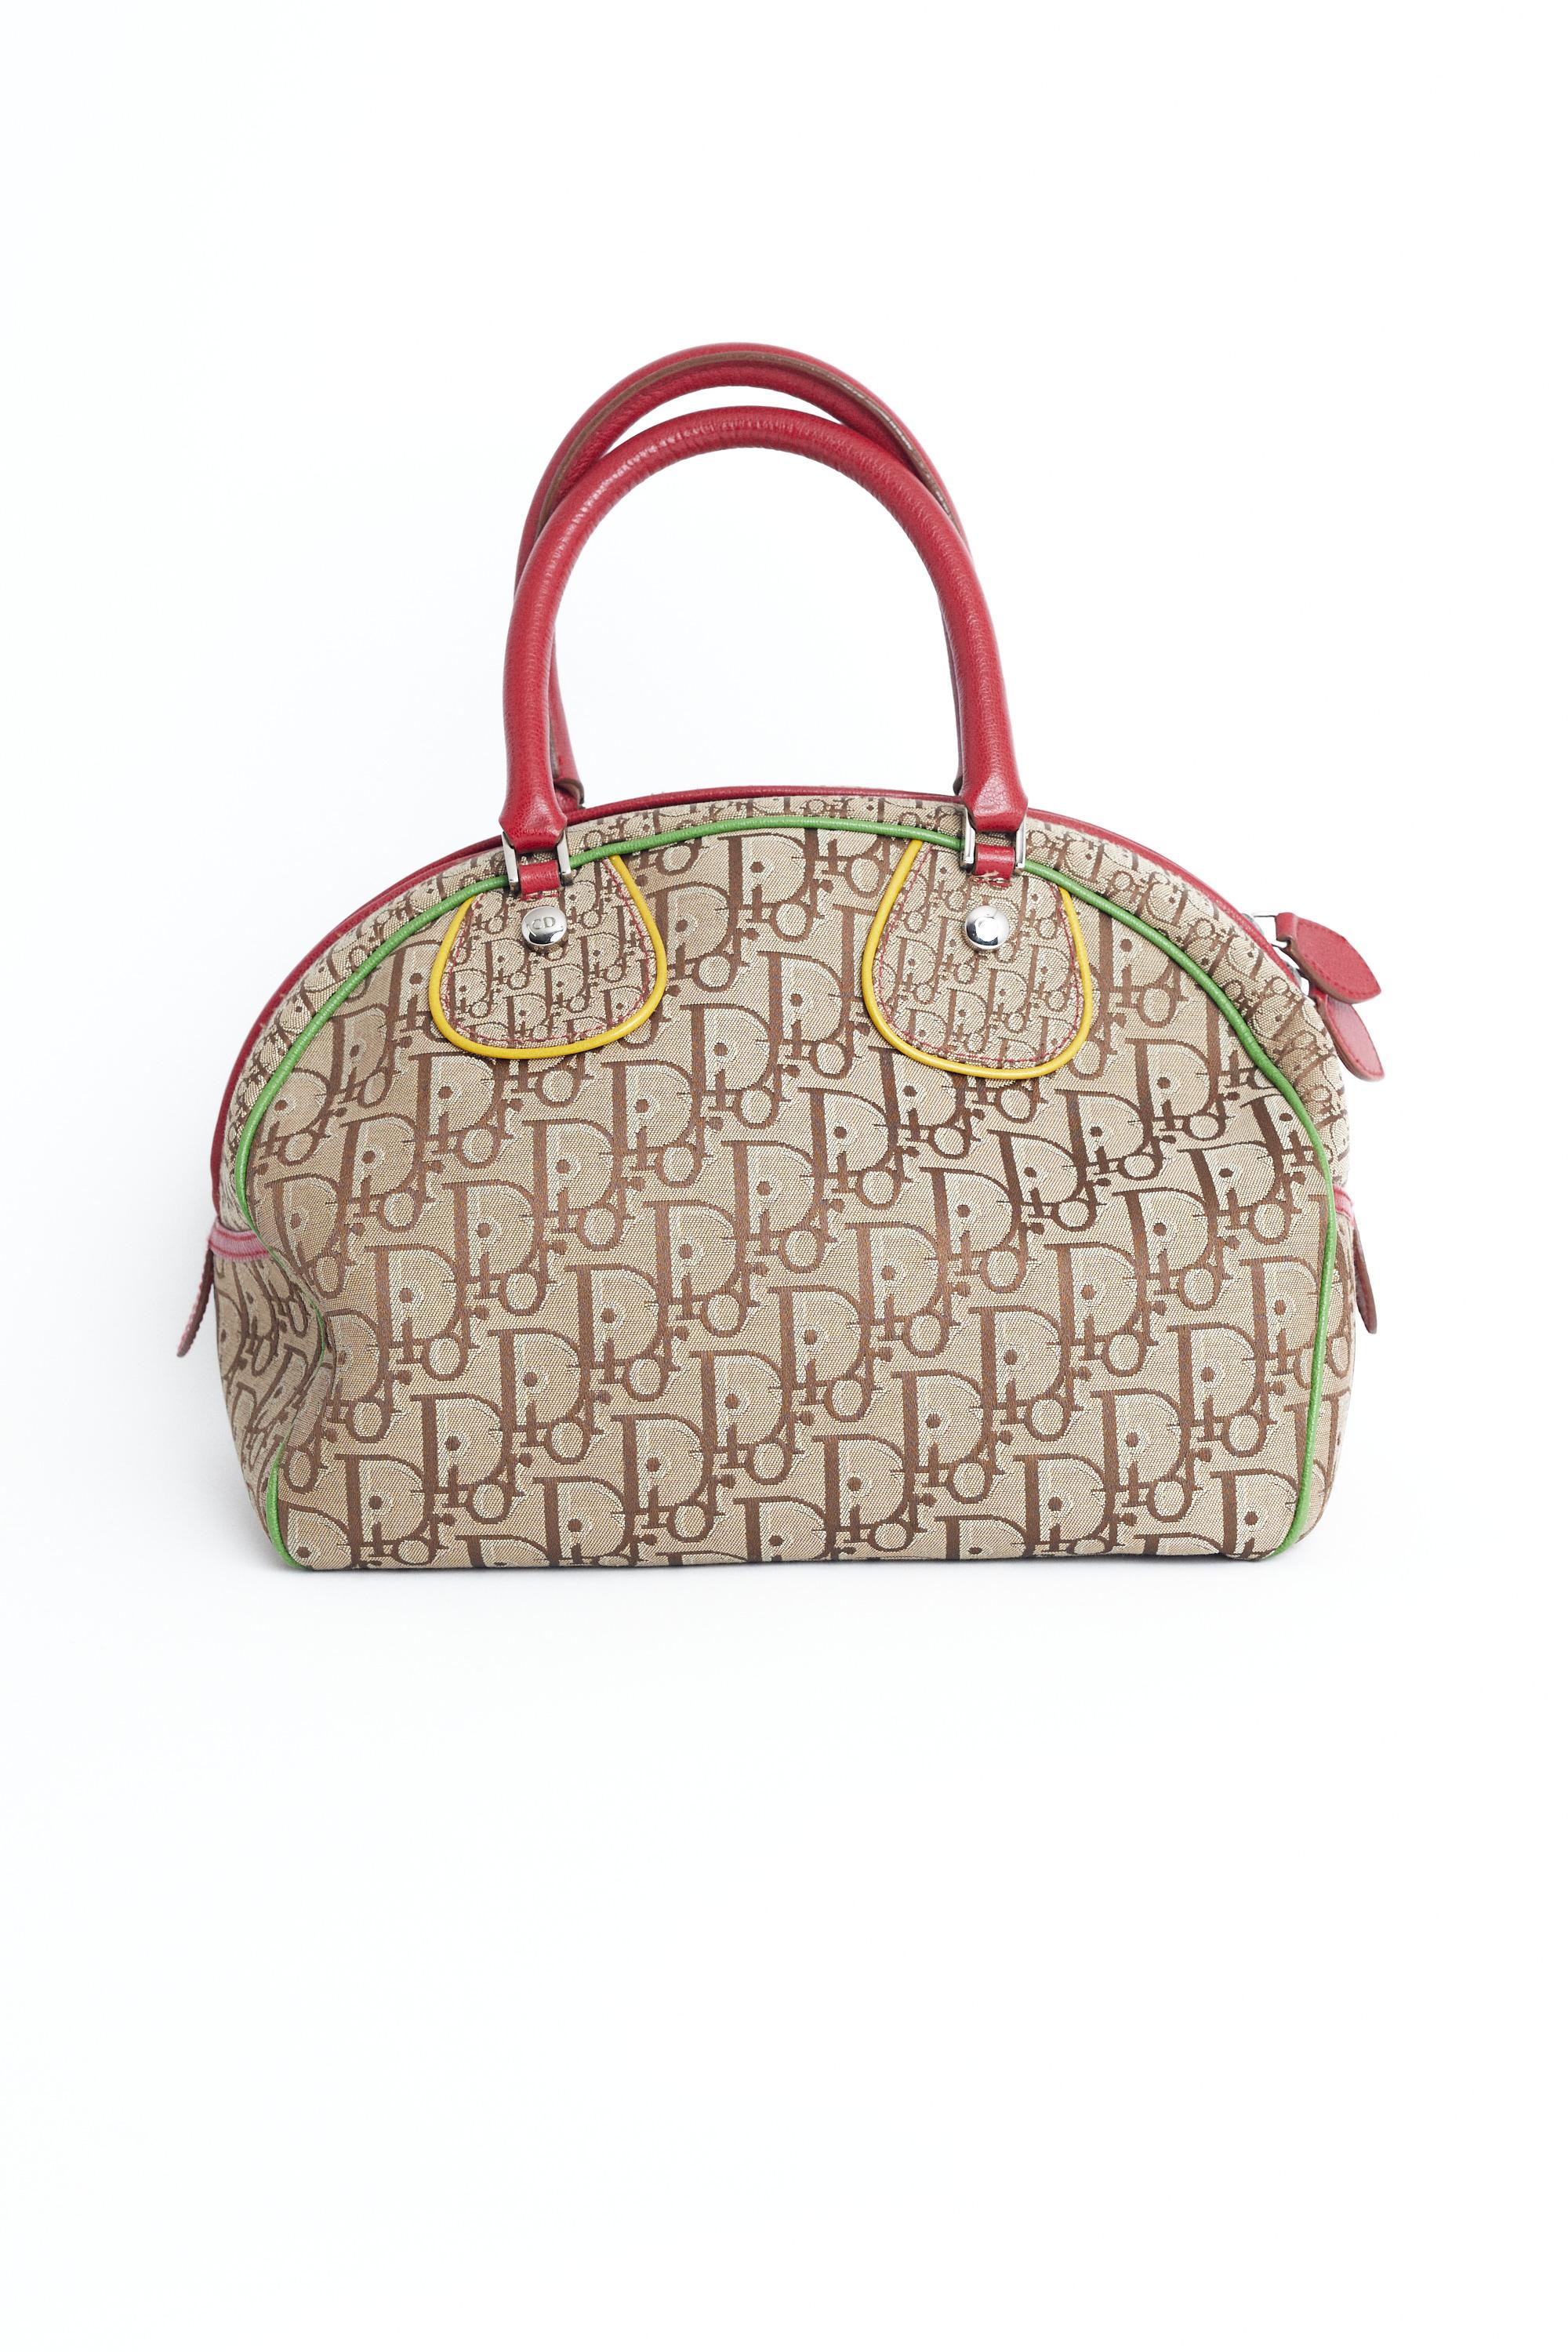 Nordic Poetry is excited to present this incredible Christian Dior 2004 iconic Rasta collection bowling bag. Features all over monogram print, double zip closure and interior zipped pocket. Pre-loved, in excellent vintage condition. Authenticity